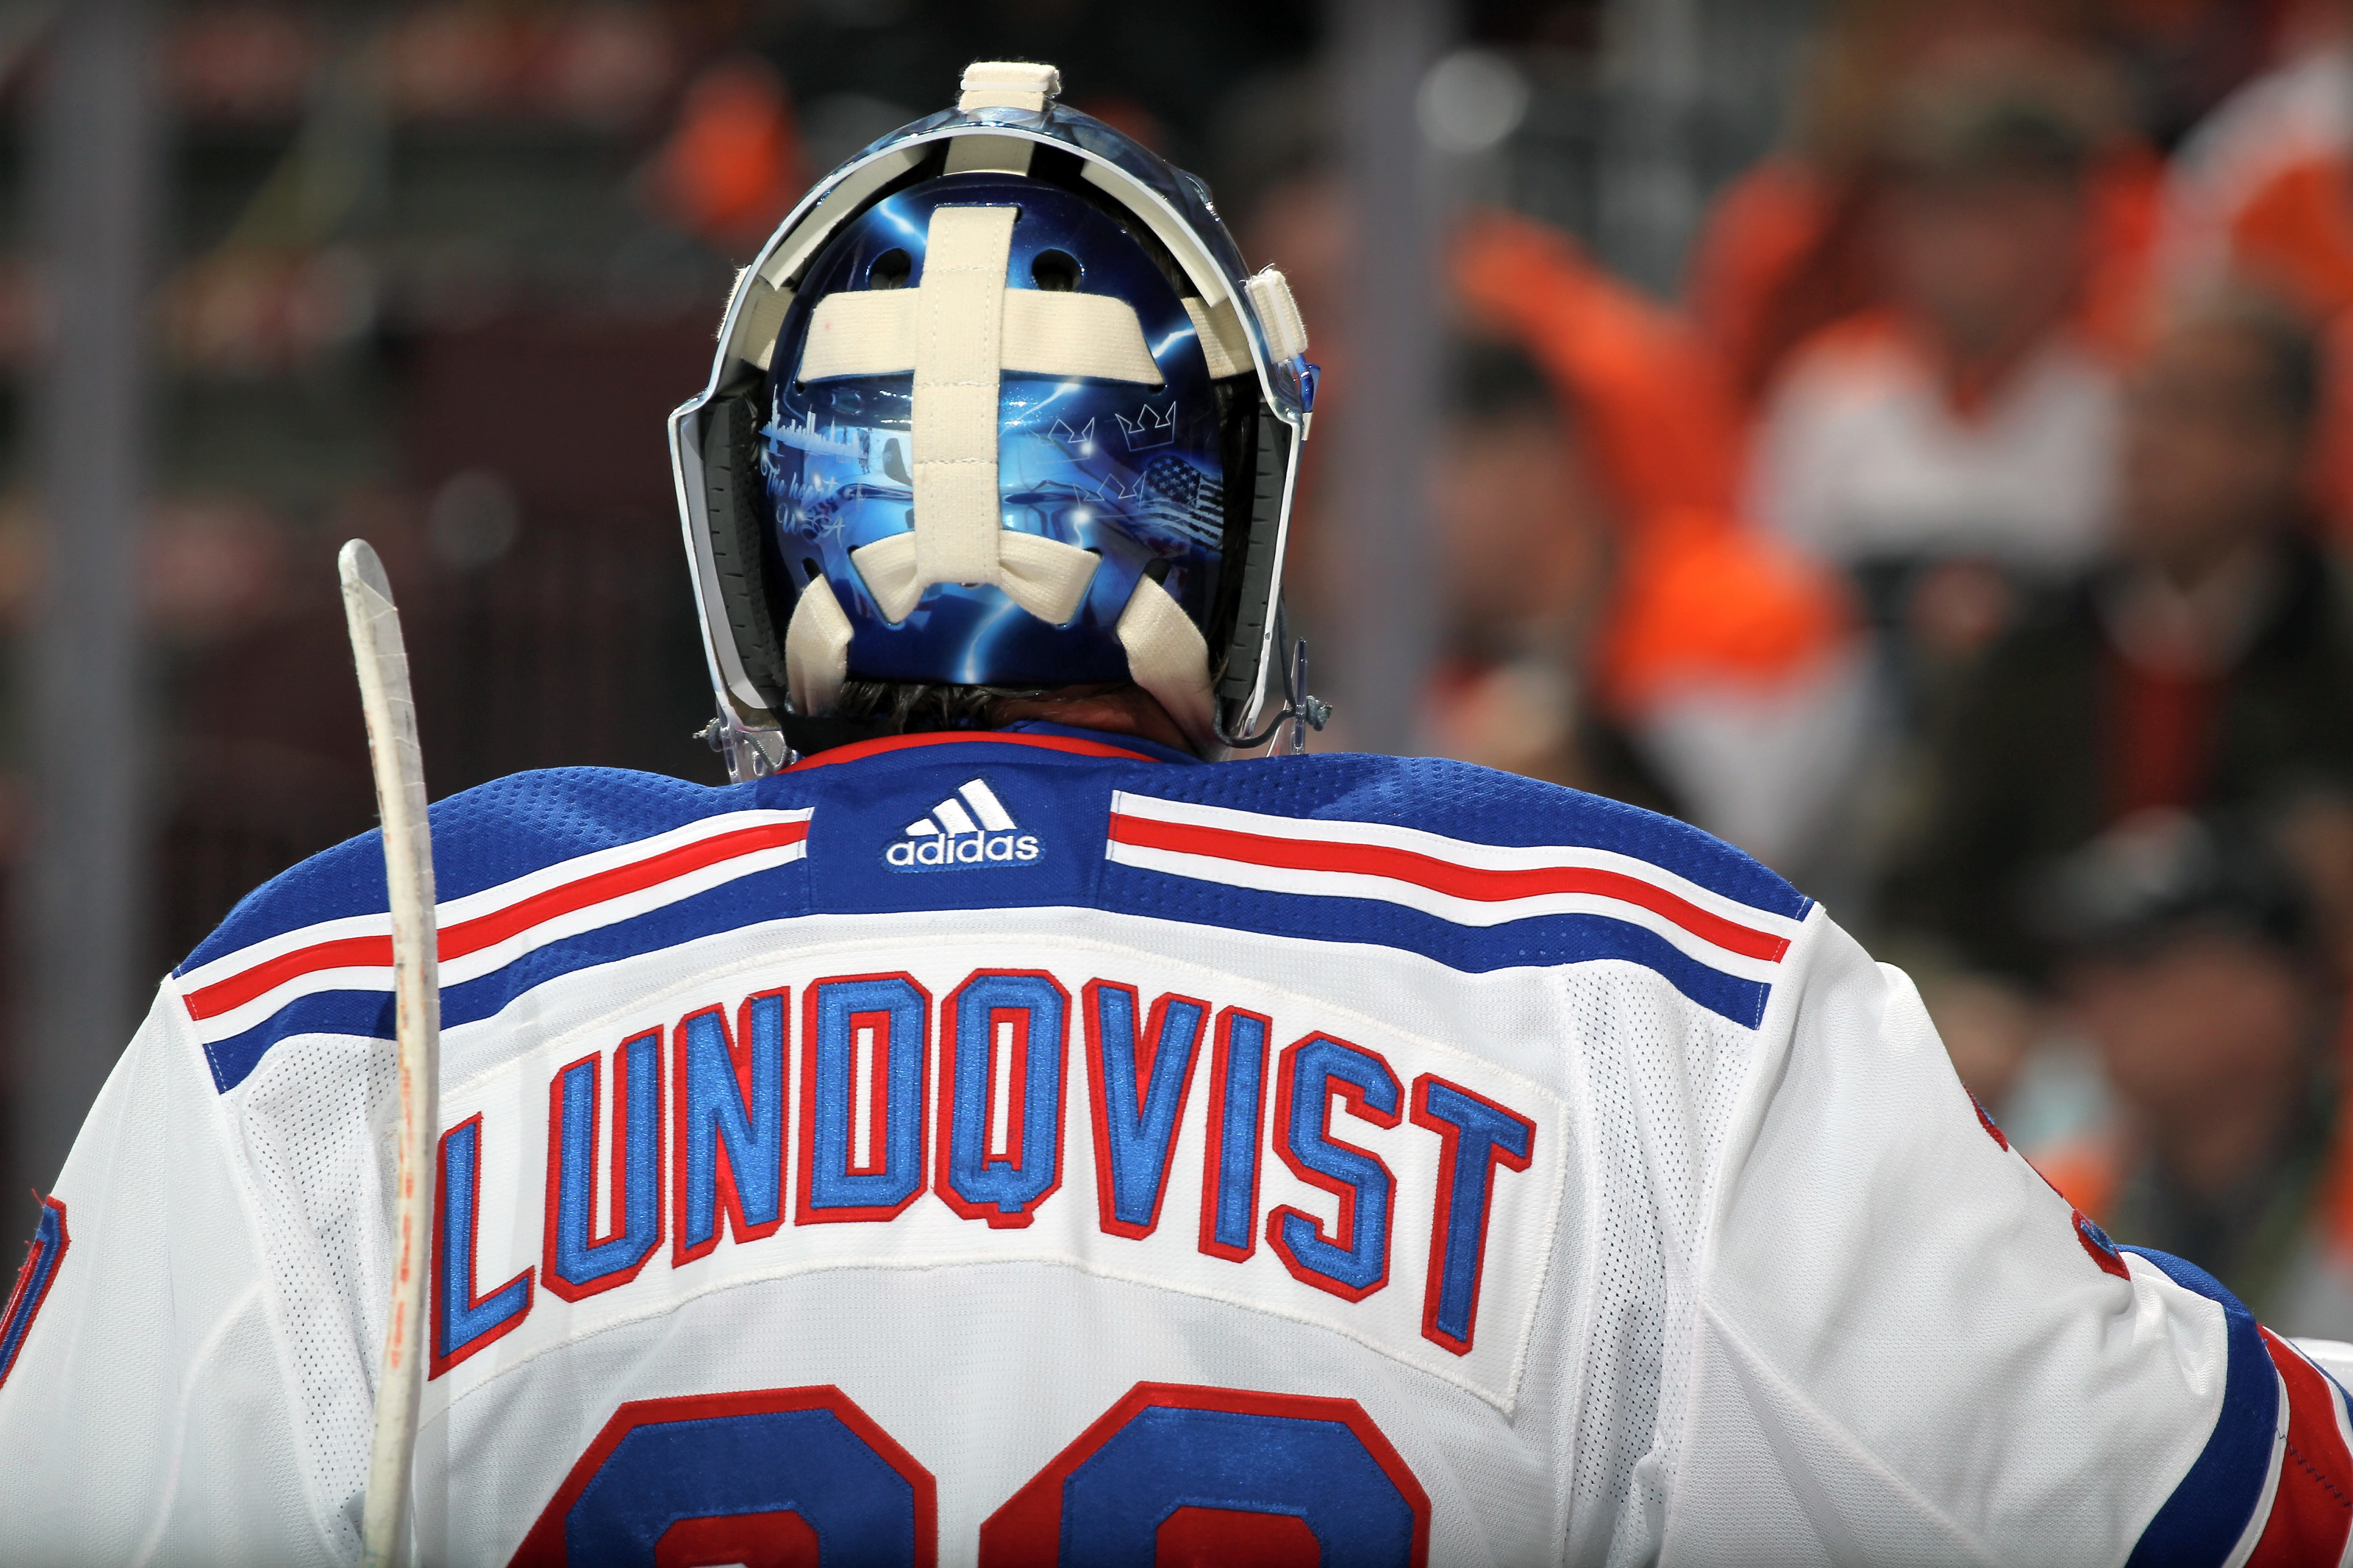 Henrik Lundqvist moves into 5th on NHL career wins list after